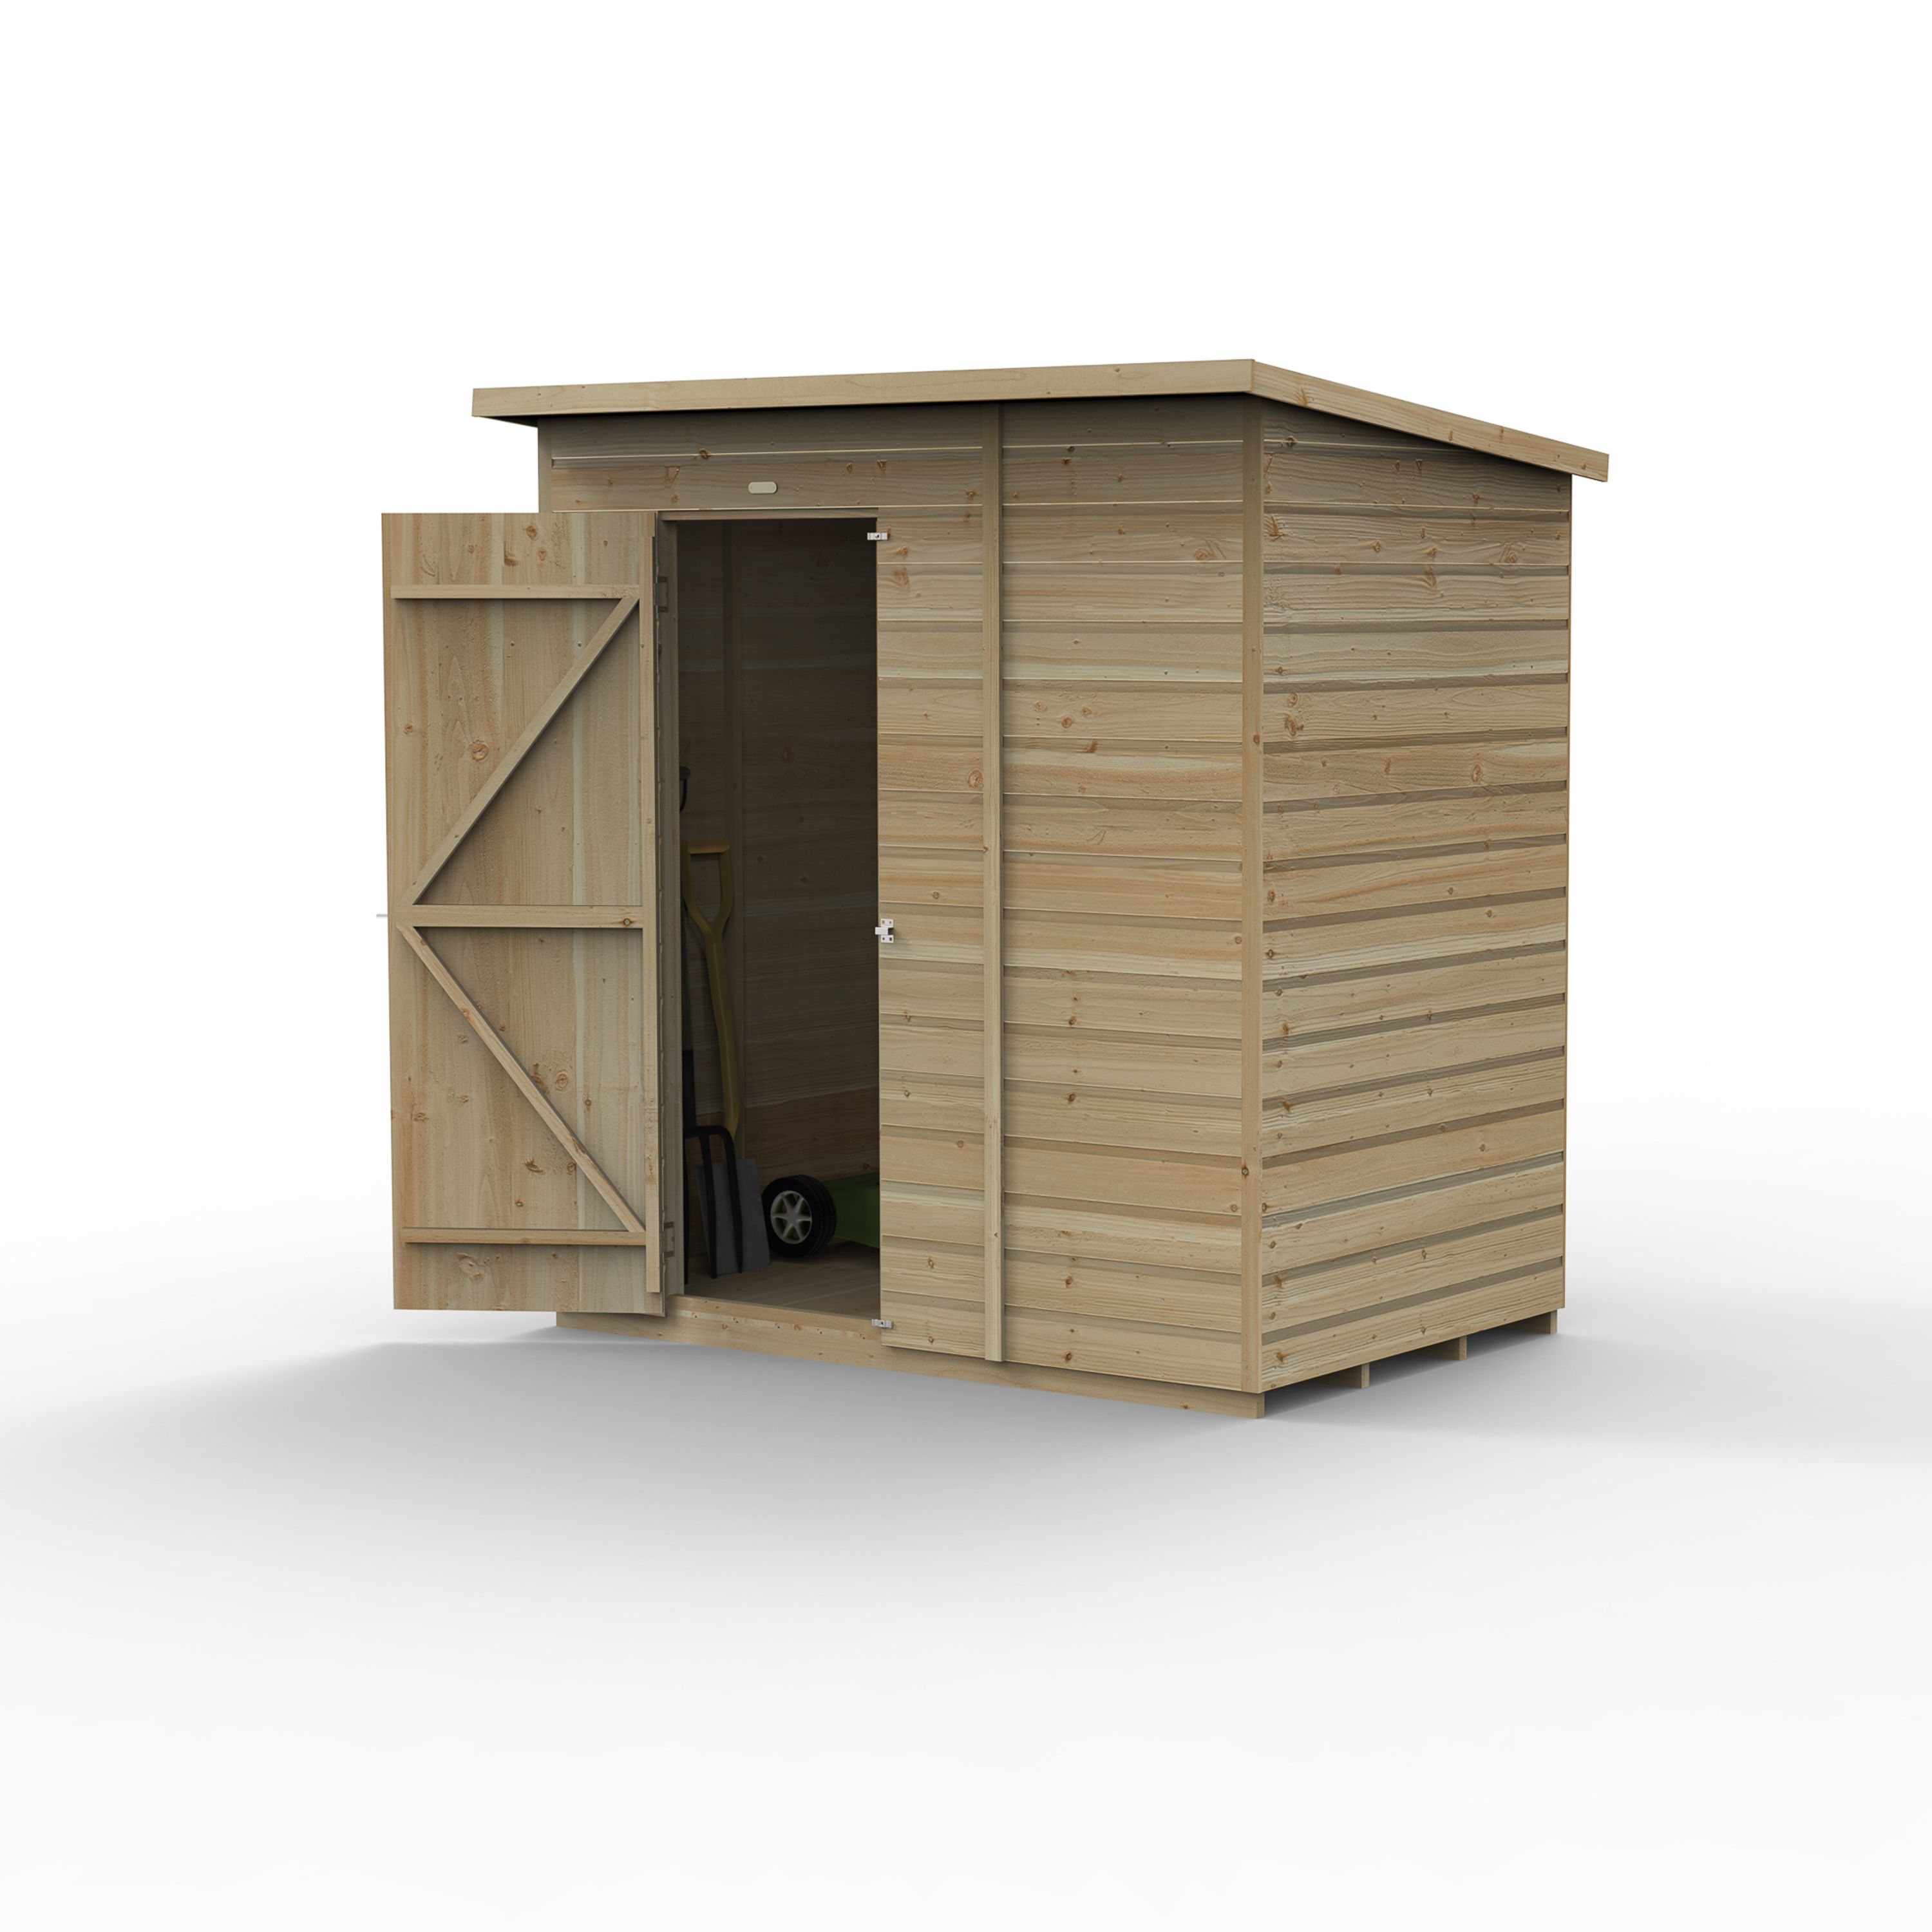 Forest Garden Beckwood 6x4 ft Pent Natural timber Wooden Shed with floor